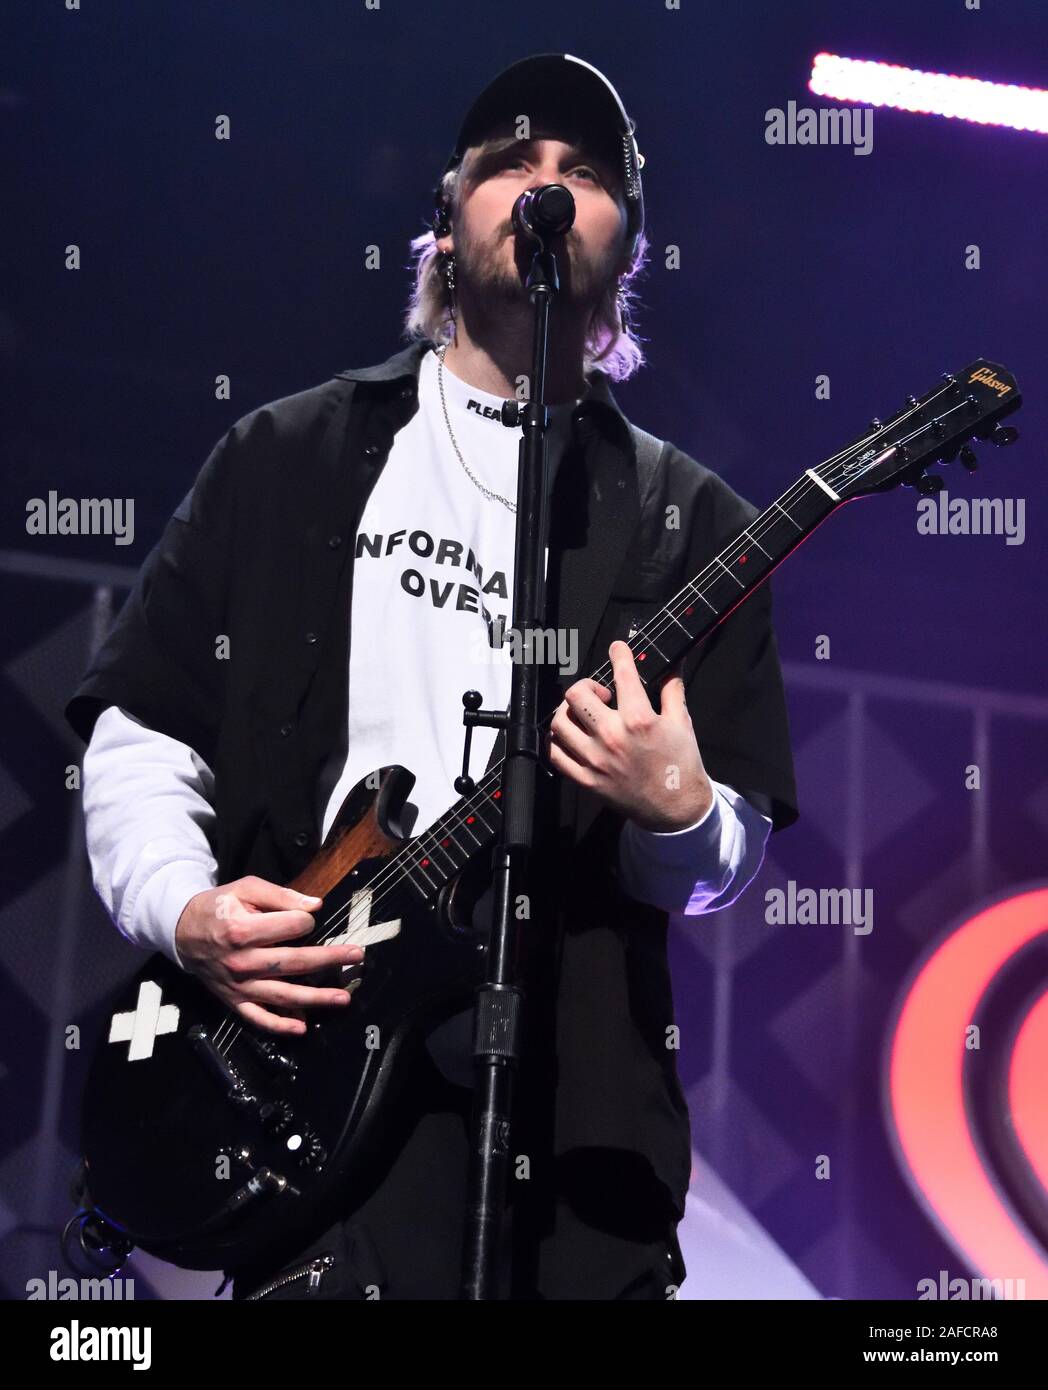 PHILADELPHIA, PA, USA - DECEMBER 11, 2019: 5 Seconds of Summer at Q102's iHeartRadio Jingle Ball at Wells Fargo Center. Stock Photo